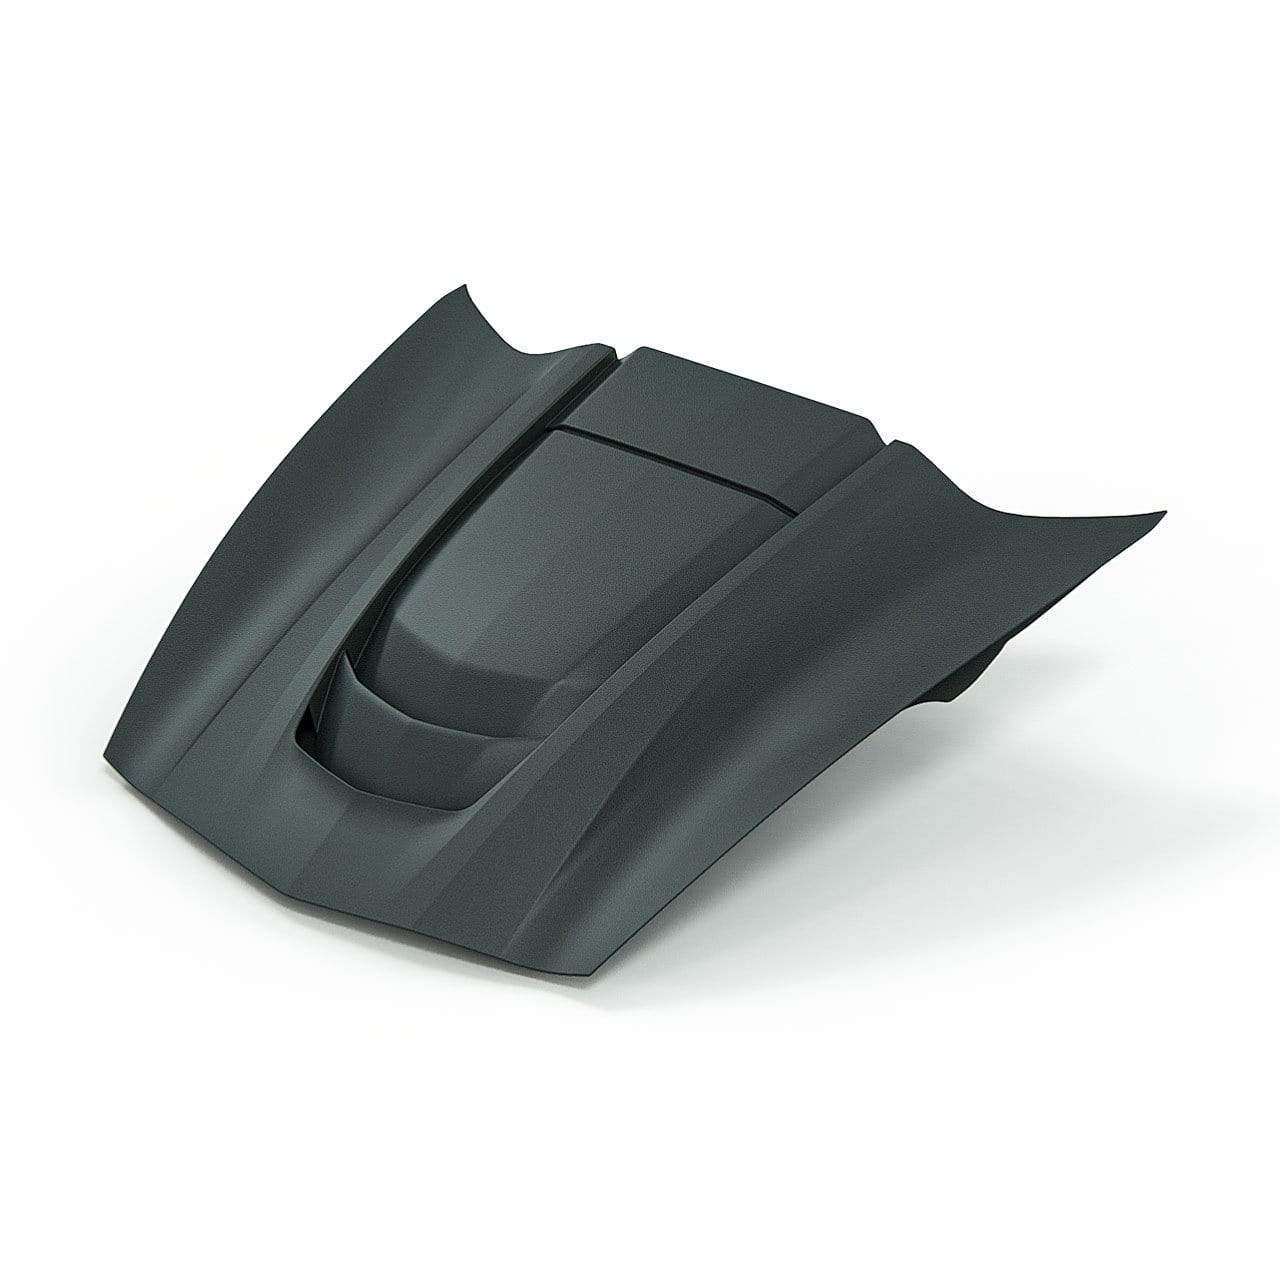 ACS Composite C7-ZR1 Hood for Chevrolet Corvette C7, SKU 45-4-203, with vented extractor system and improved cooling capacity.